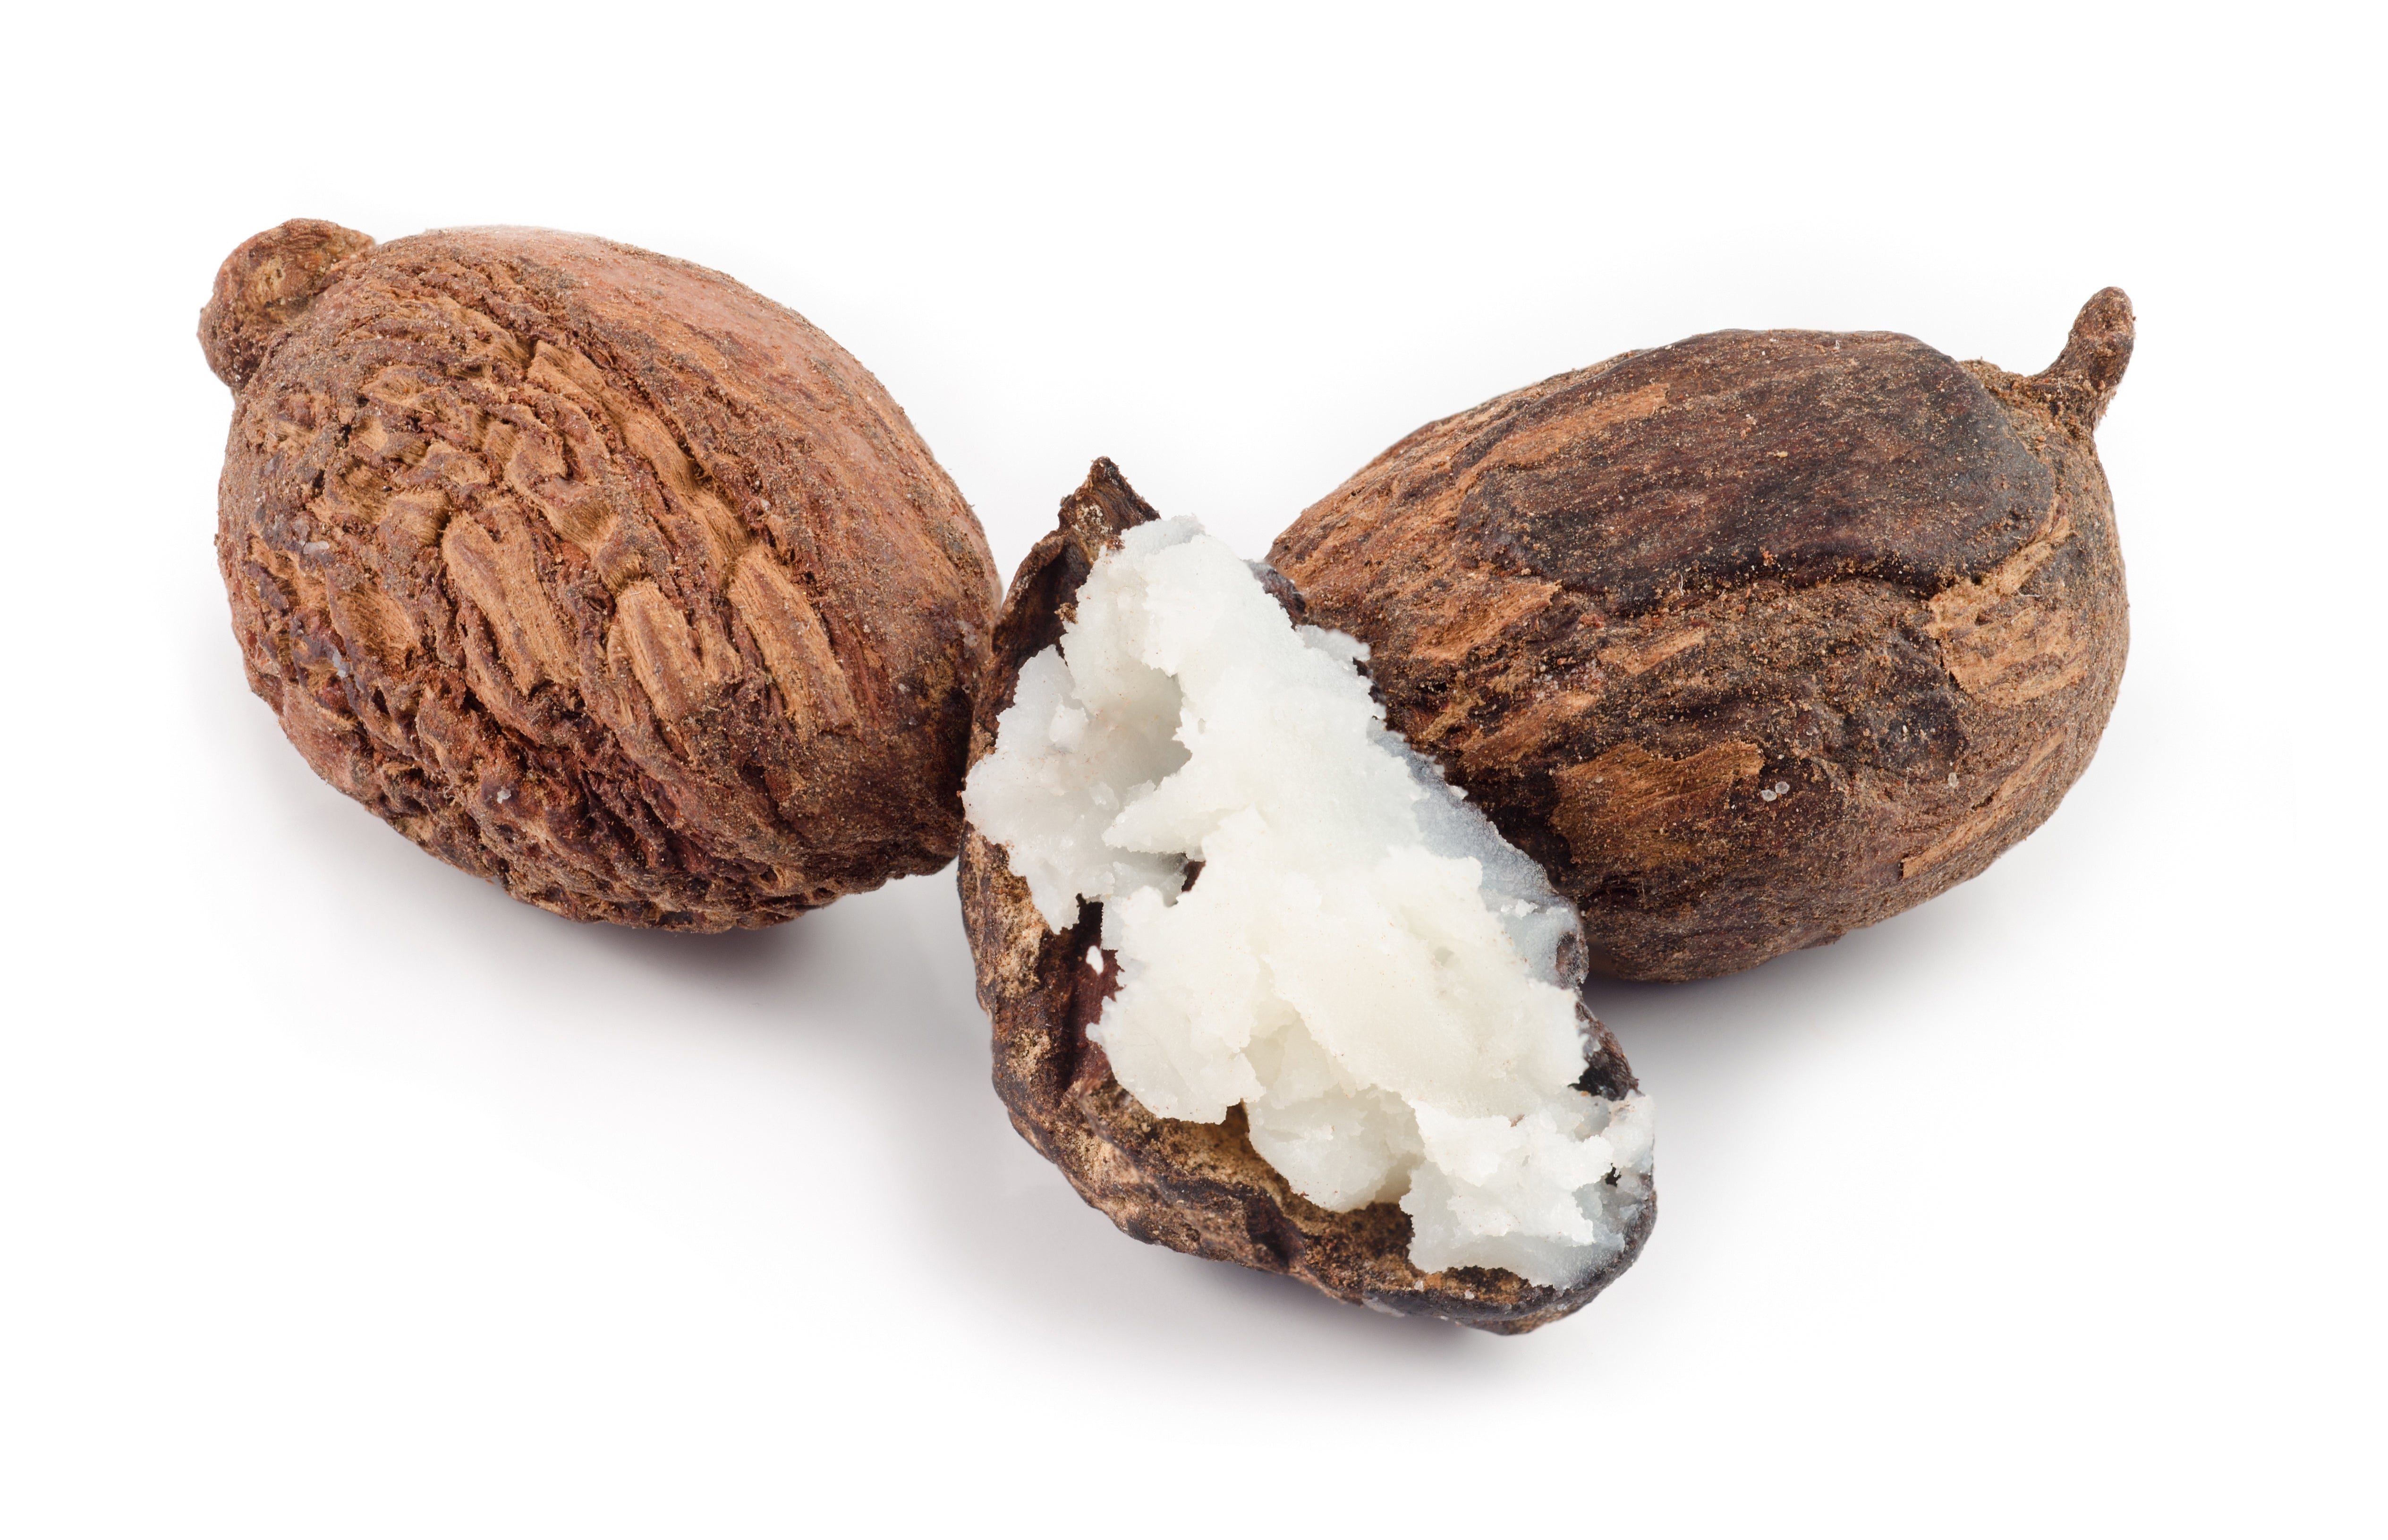 Shea Butter: Why you need it in your shave cream